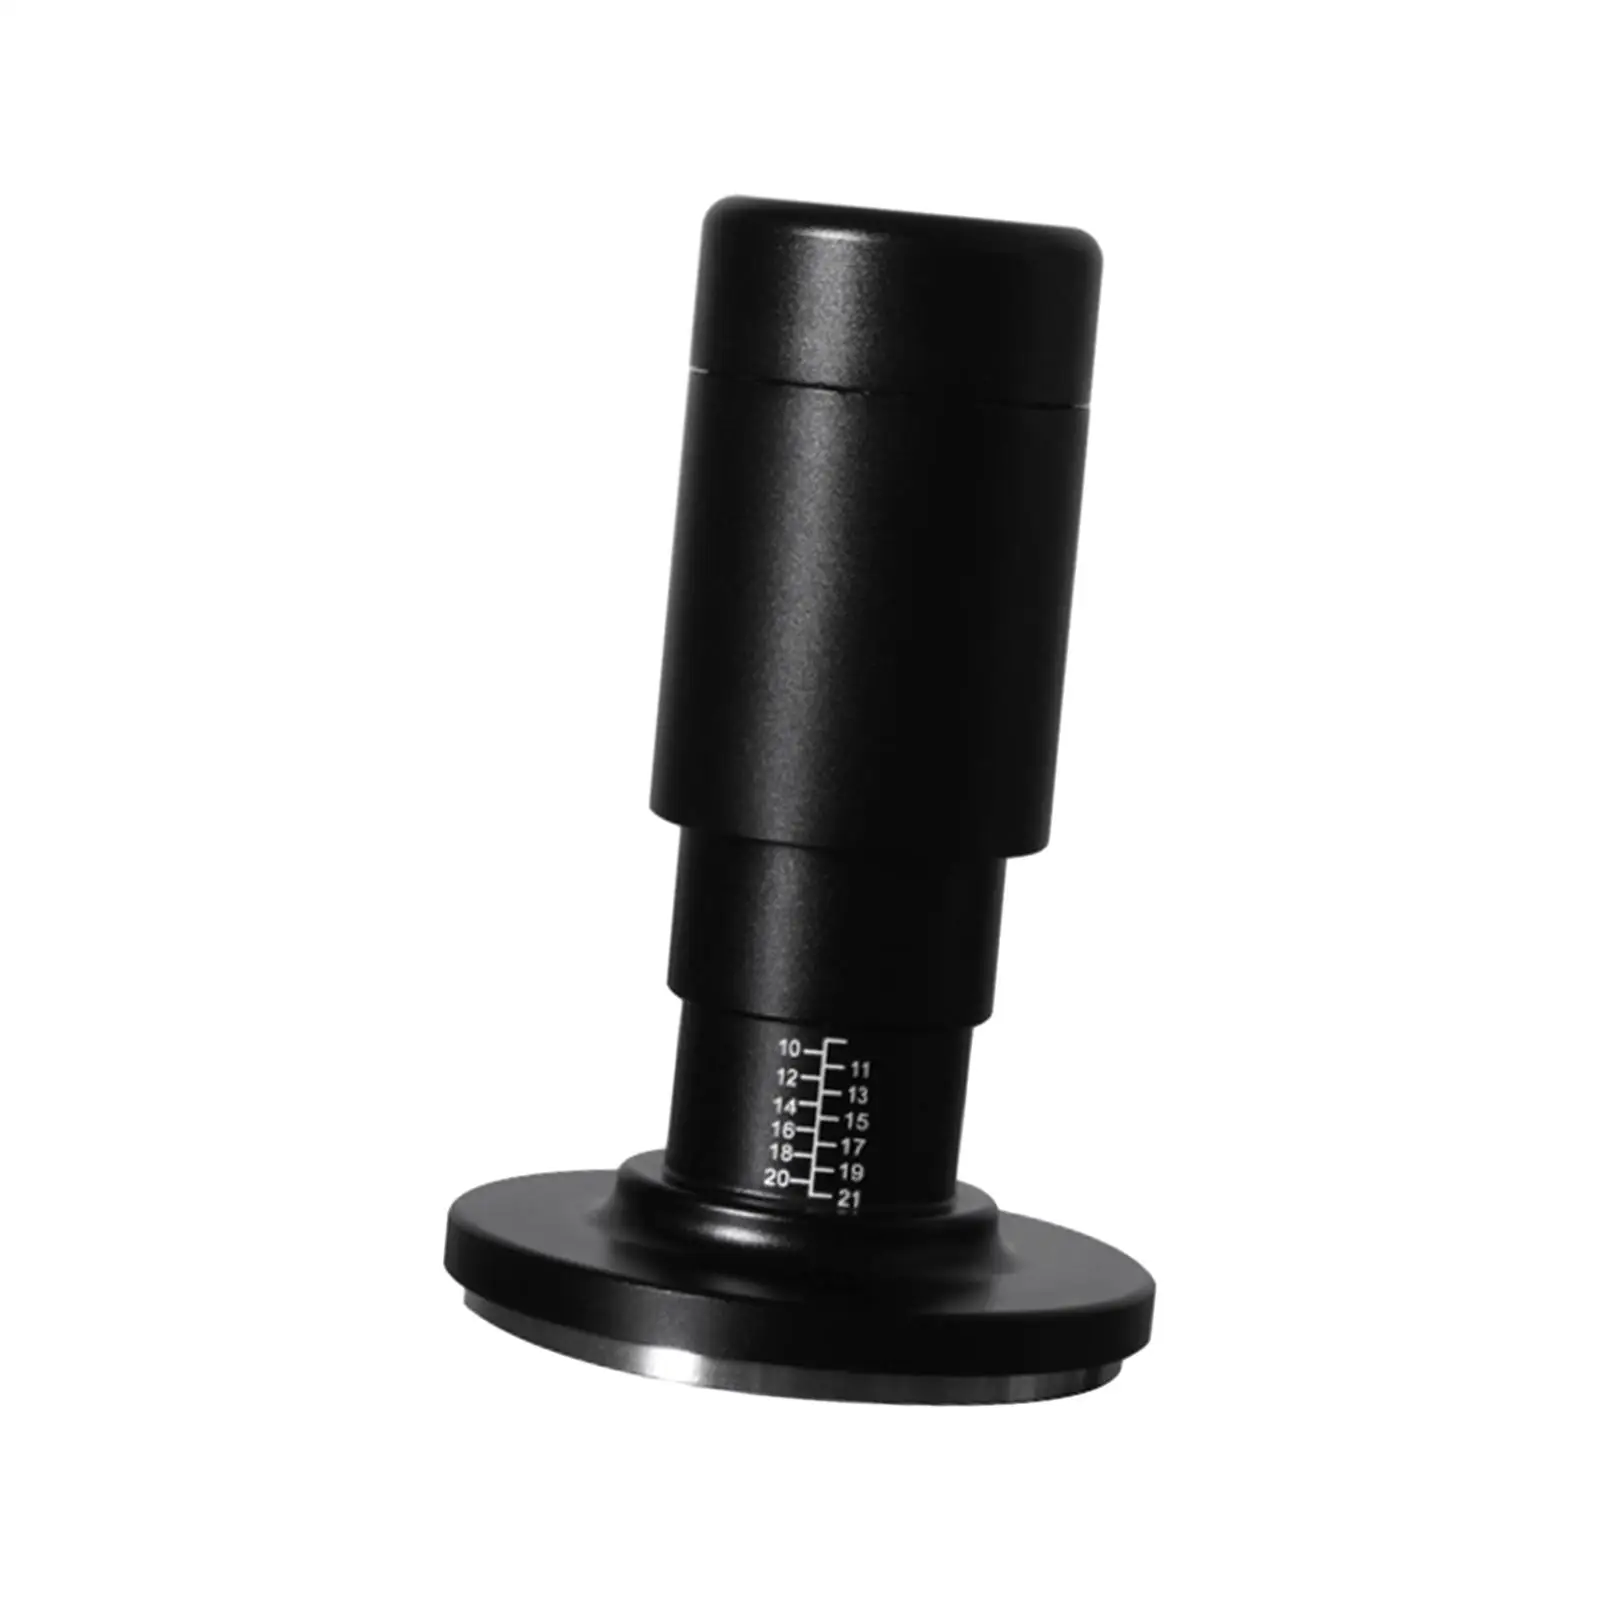 Metal Espresso Tamper with Distribution 2 in 1 for Home Office Coffee